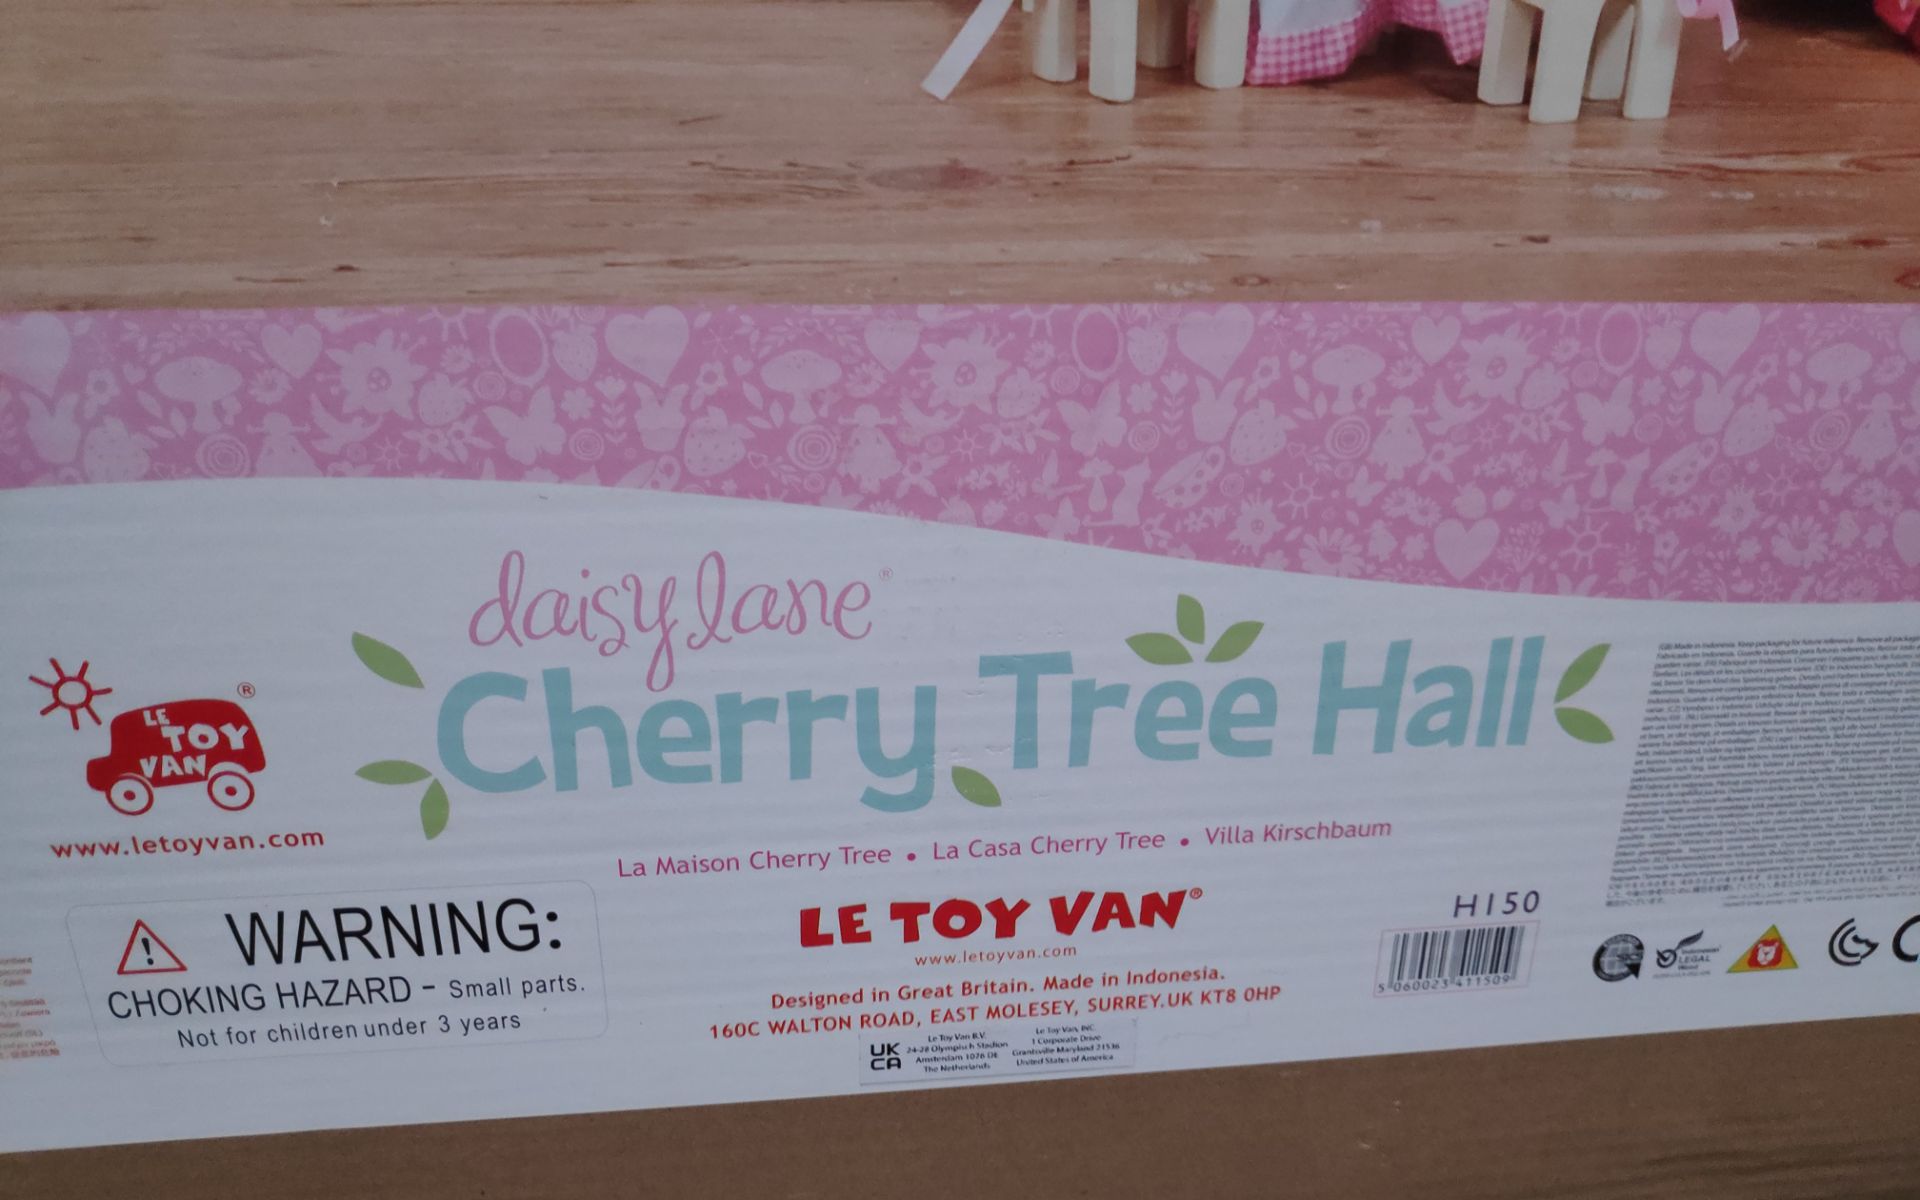 1 x Le Toy Van Daisy Lane Cherry Tree Hall Wooden Dolls House - New/Boxed - Image 4 of 4